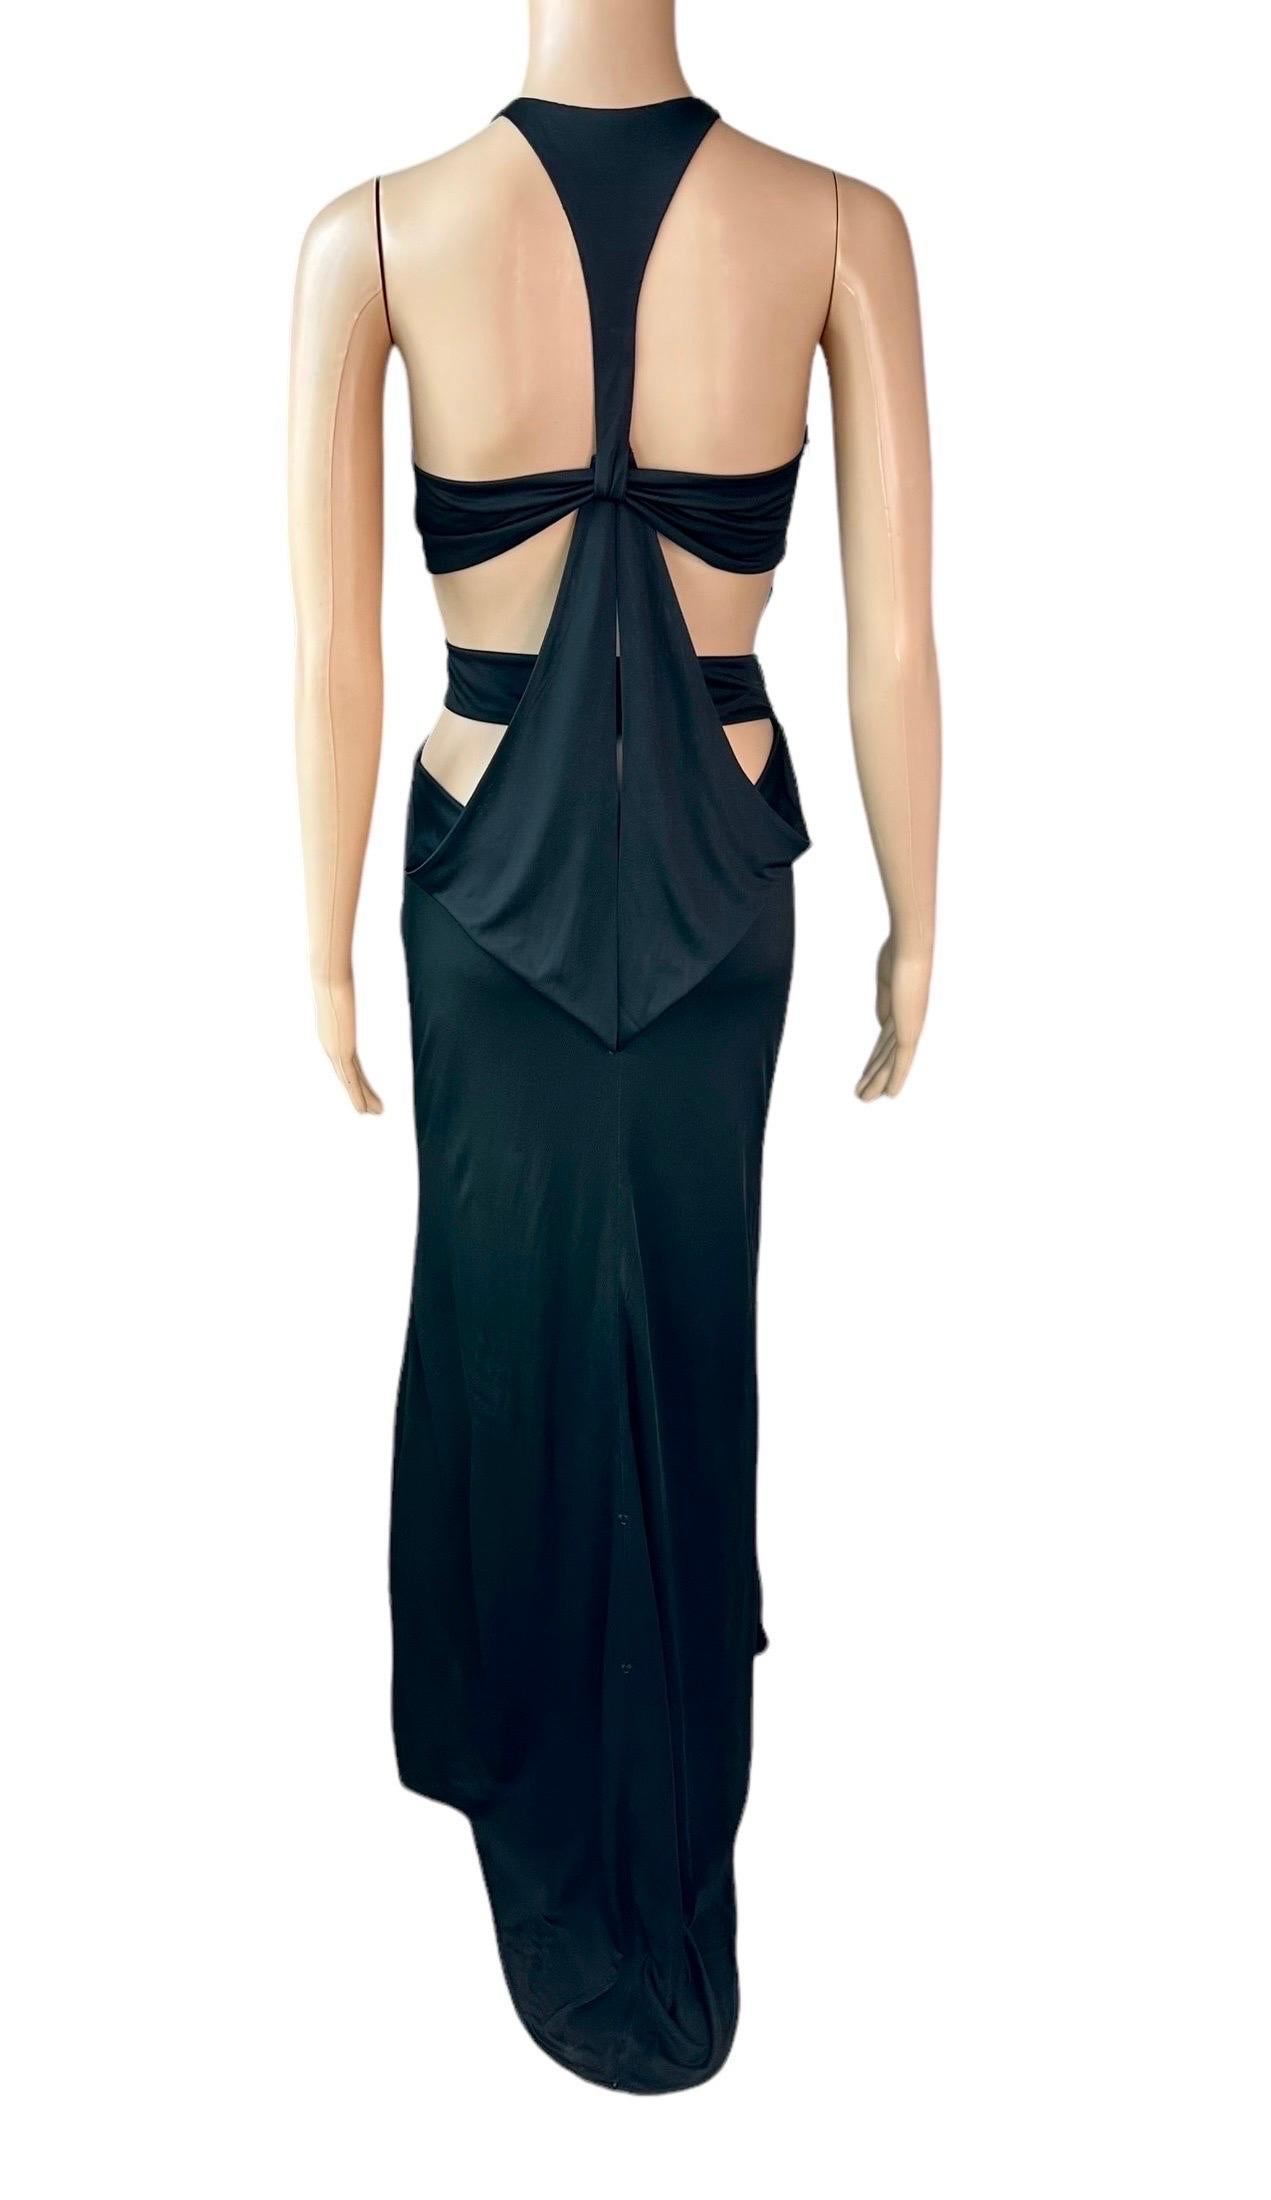 Tom Ford for Gucci F/W 2004 Embellished Plunging Cutout Black Evening Dress Gown 1